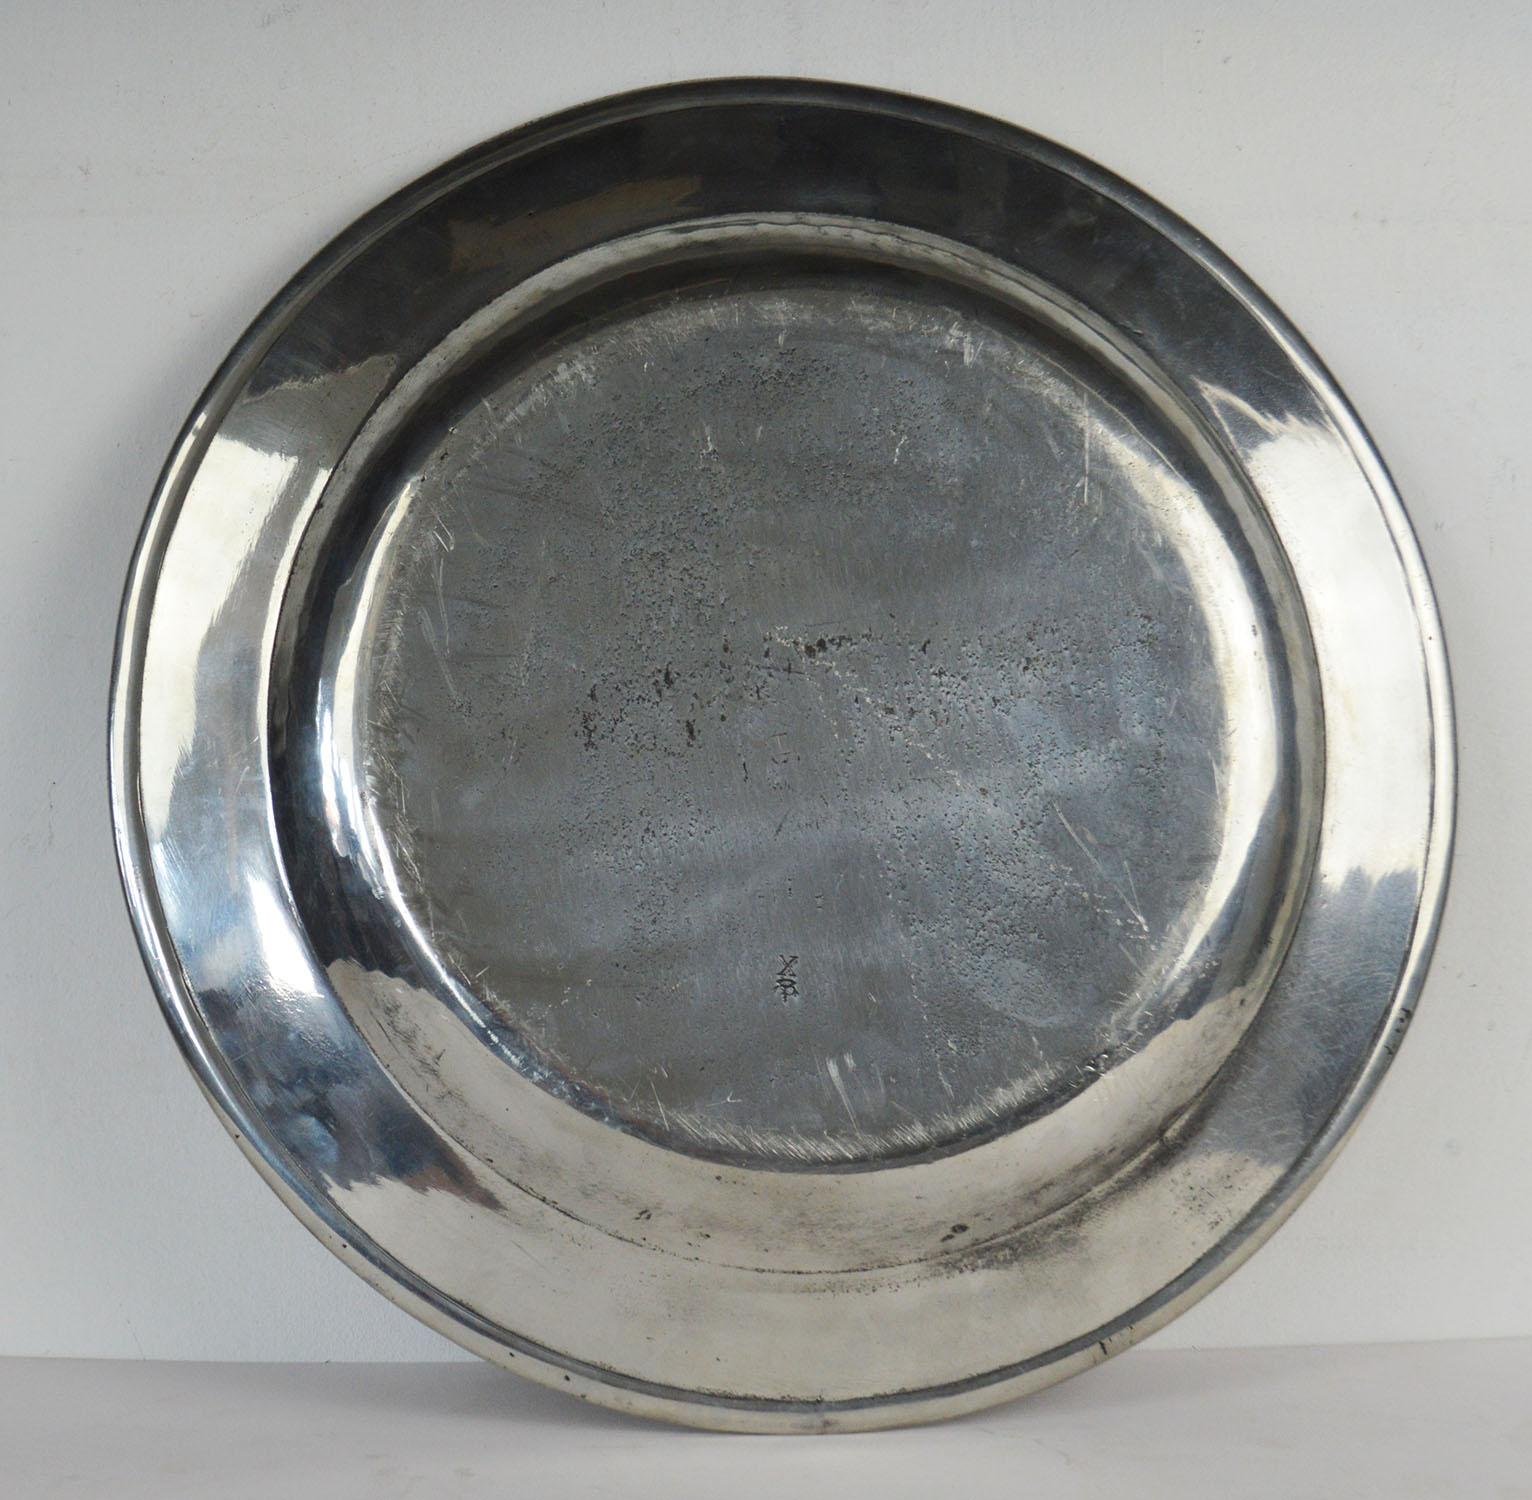 Antique Brightly Polished Pewter Chargers, English, 18th Century 2